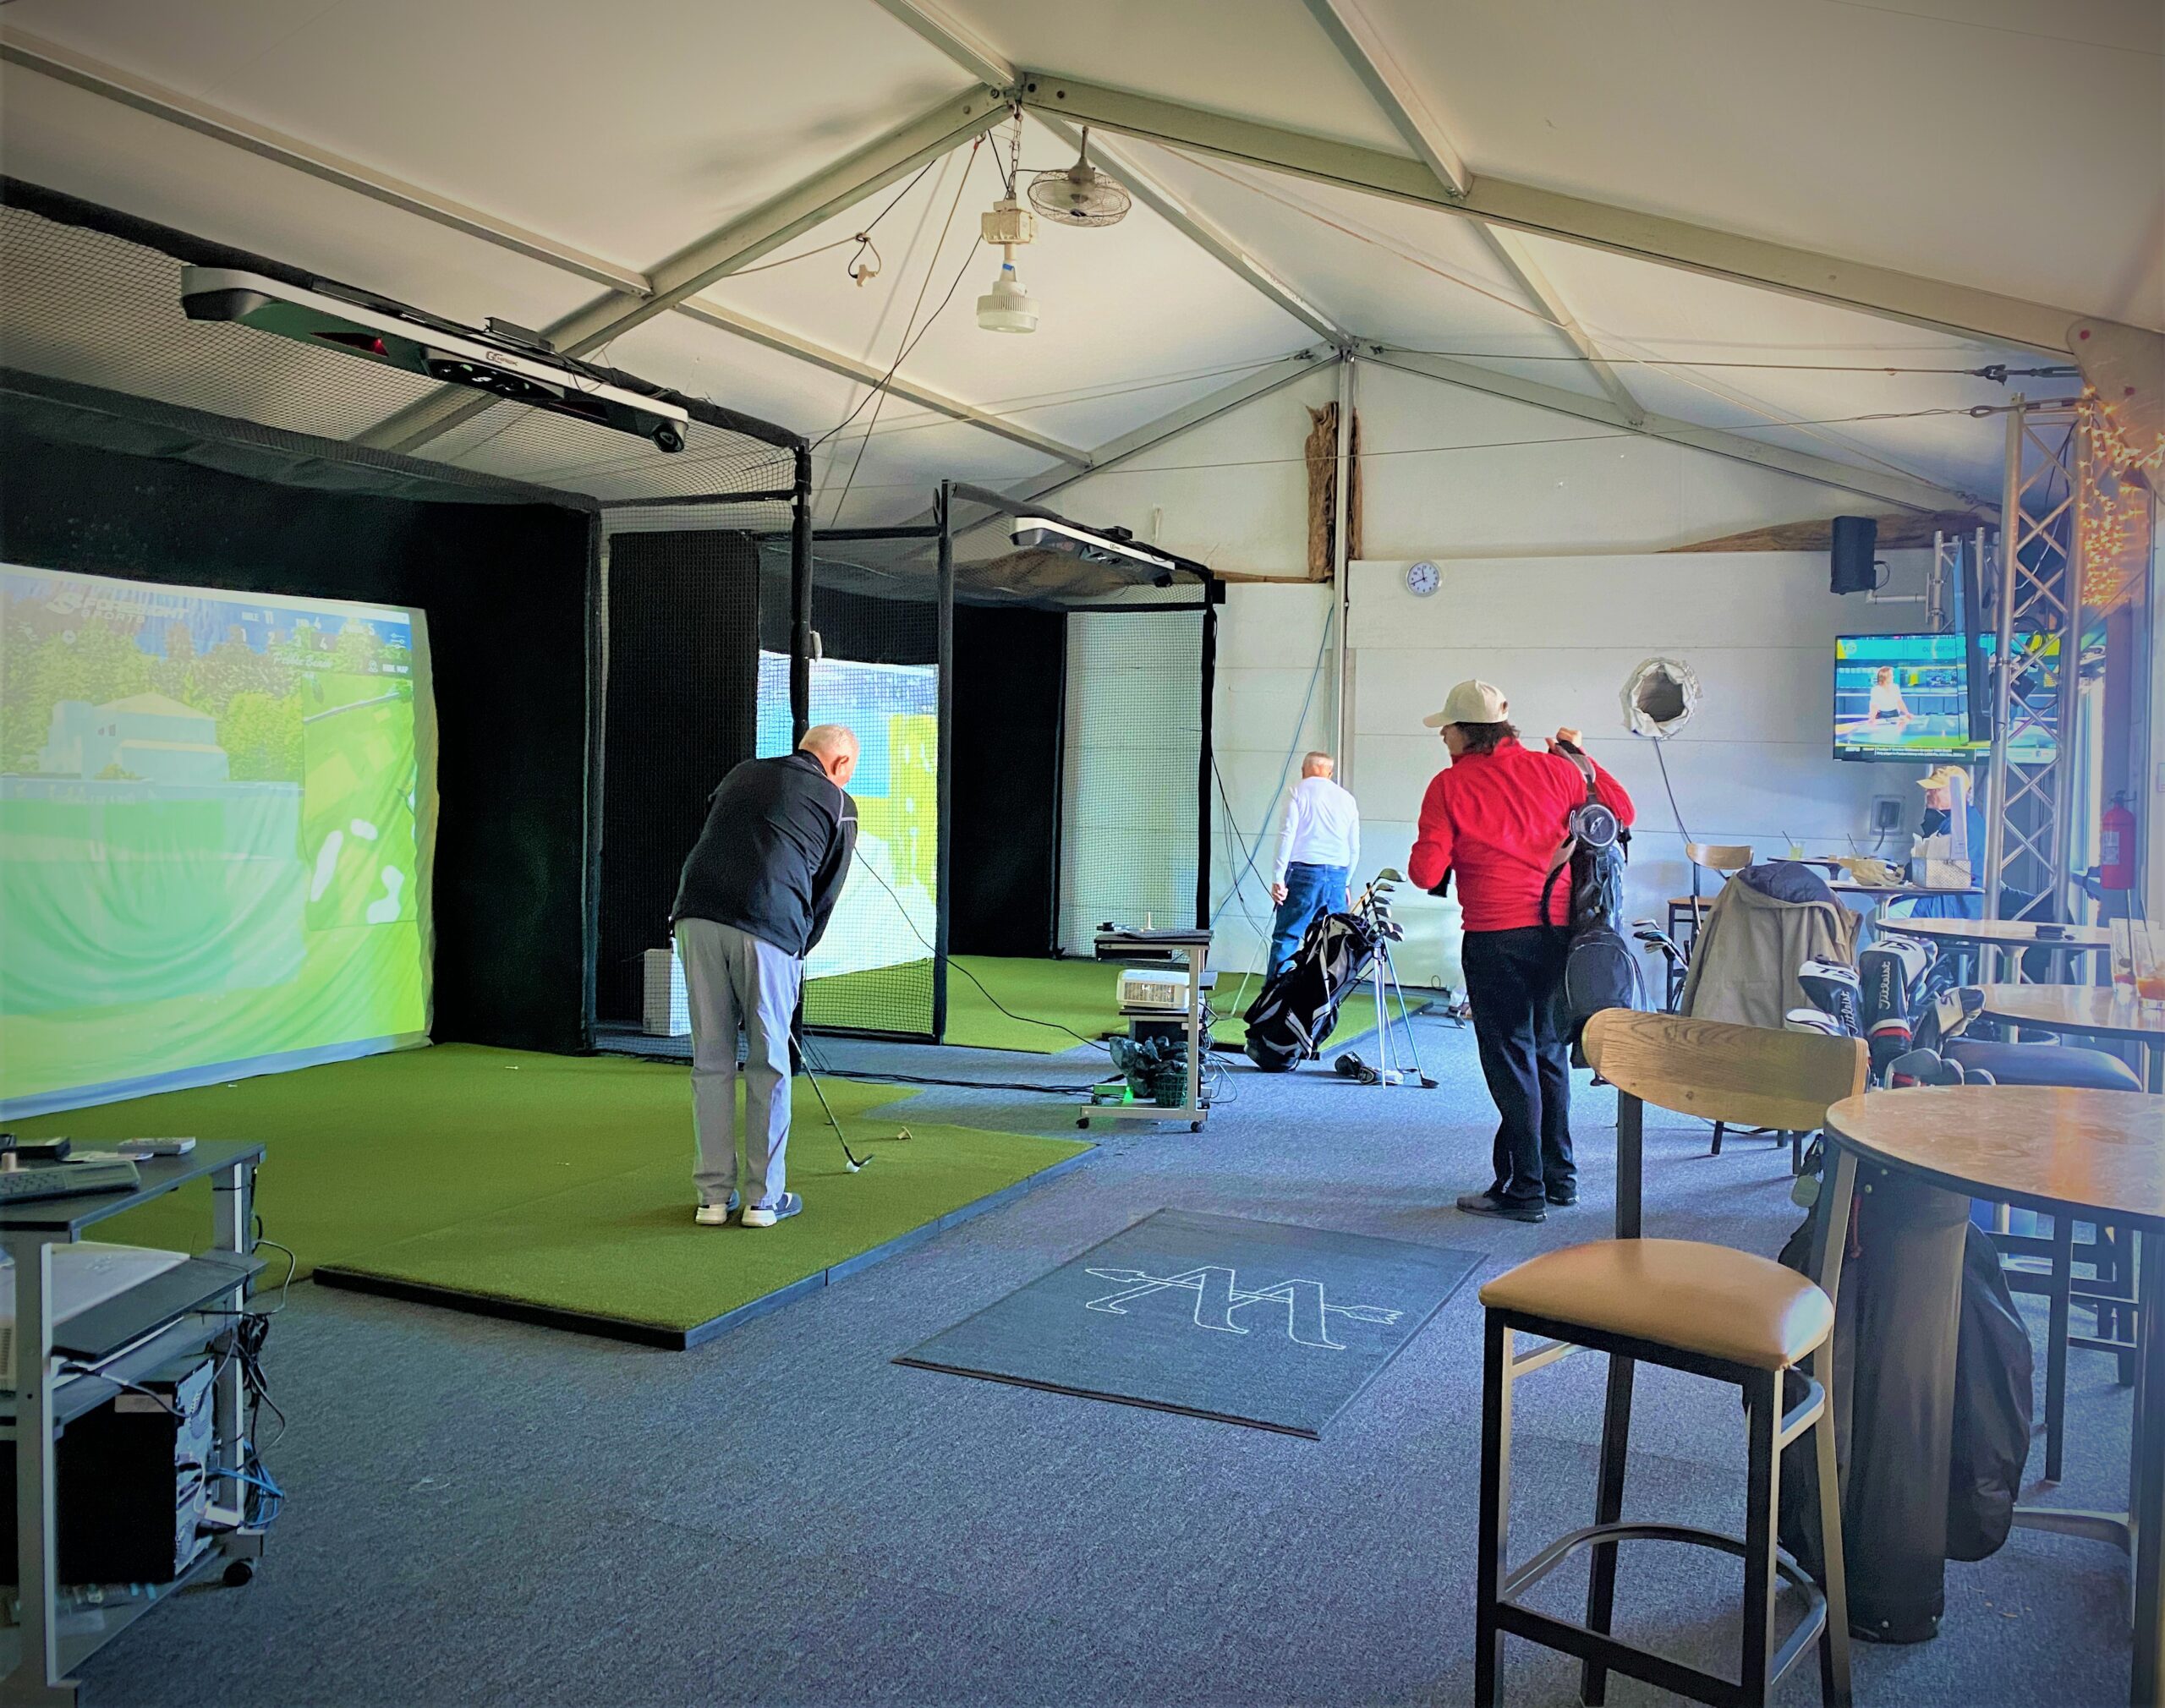 Need space for your new golf simulators? We have the perfect tent for you!